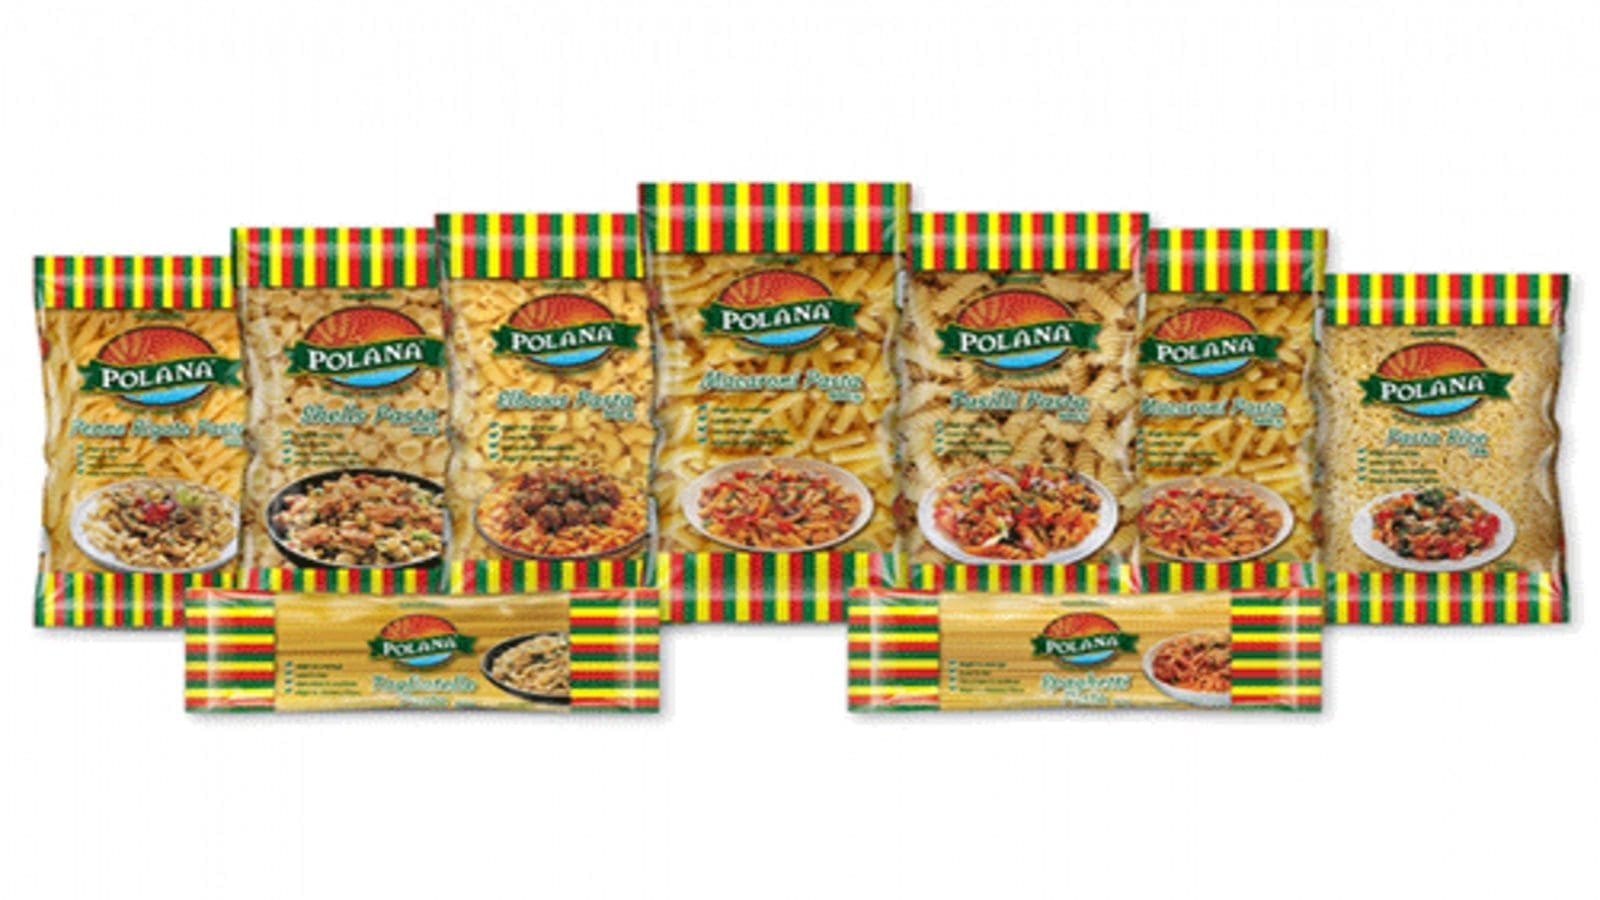 Namib Mills commits to ‘Feeding the Nation,” drops prices of rice, pasta